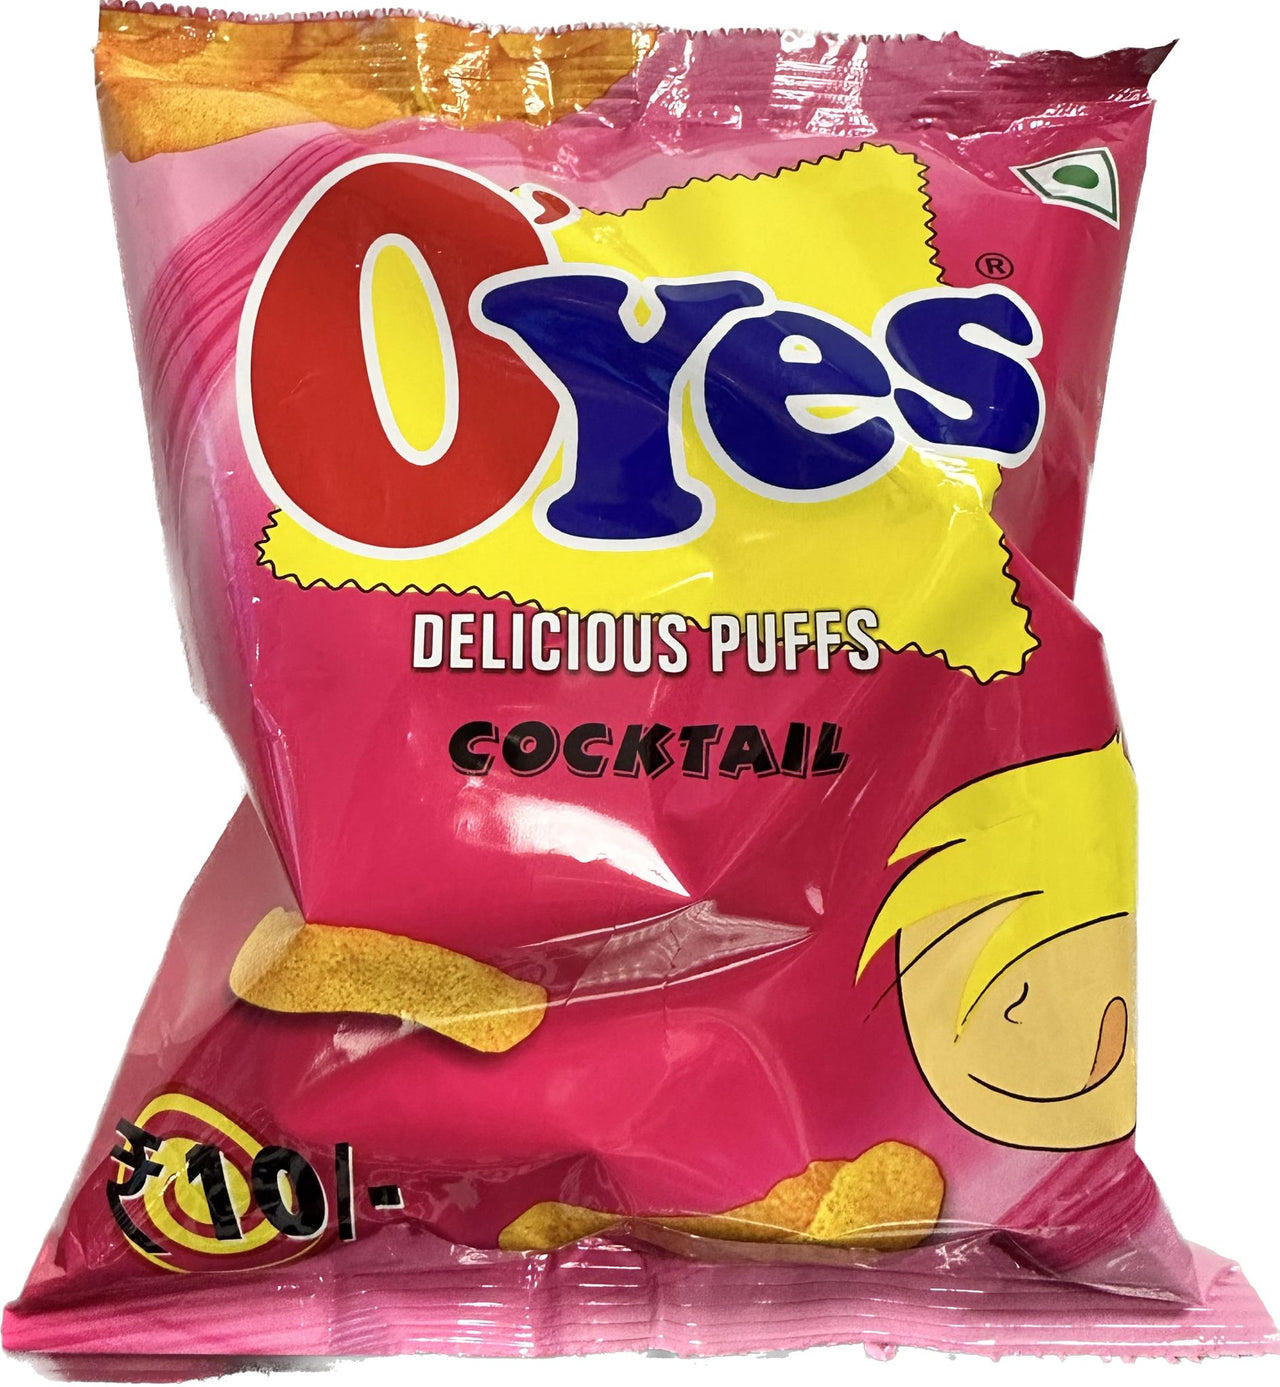 Oyes Delicious Puffs Cocktail Flavor